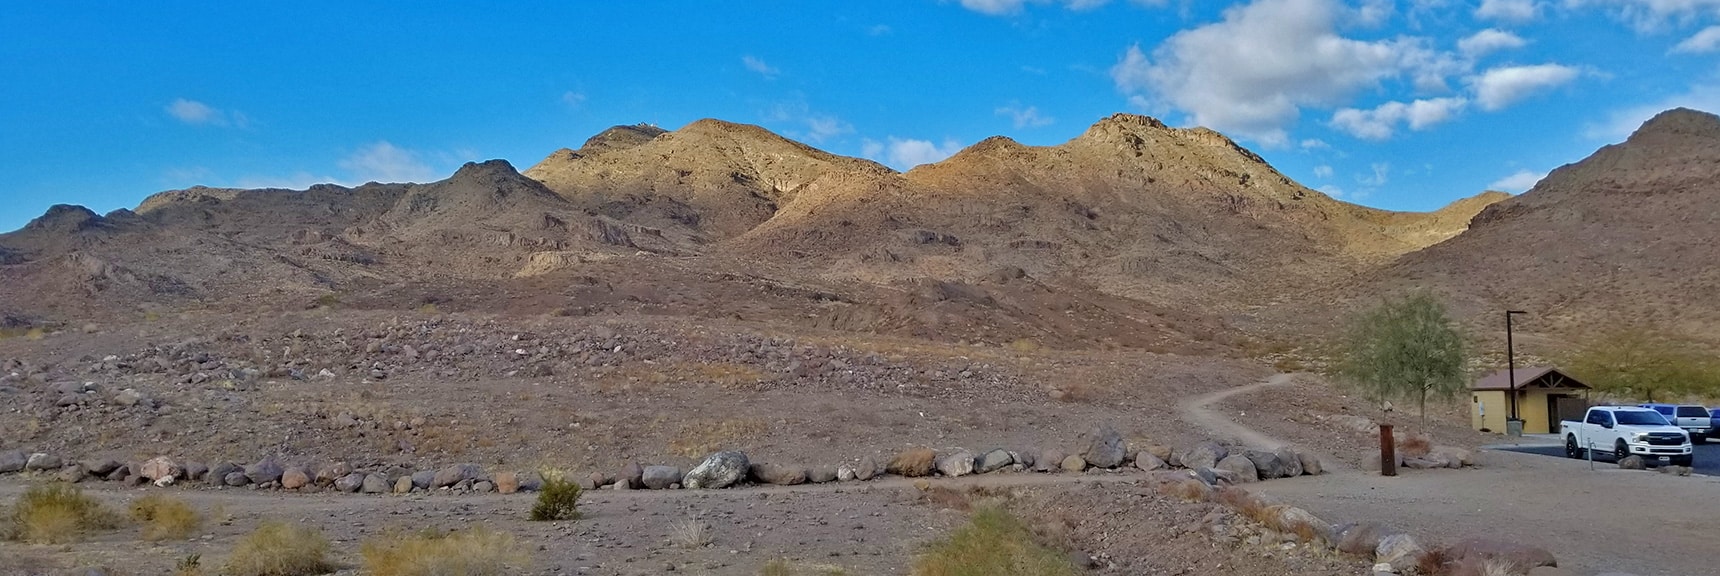 View Up Sloan Canyon Area from the McCullough Hills Trailhead | McCullough Hills Trail in Sloan Canyon National Conservation Area, Nevada